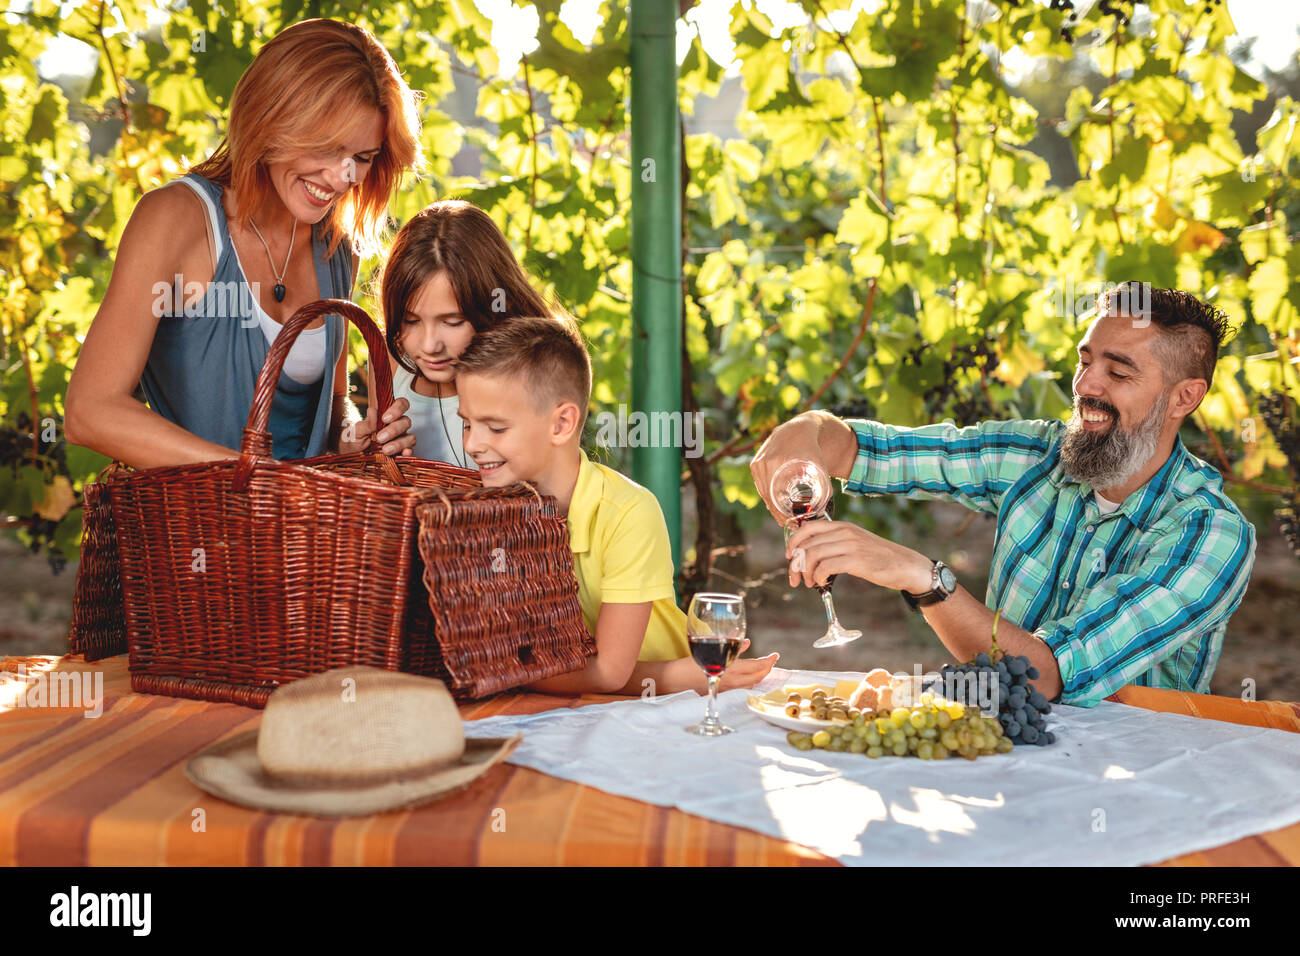 Beautiful young smiling family of four having picnic at a vineyard. Stock Photo